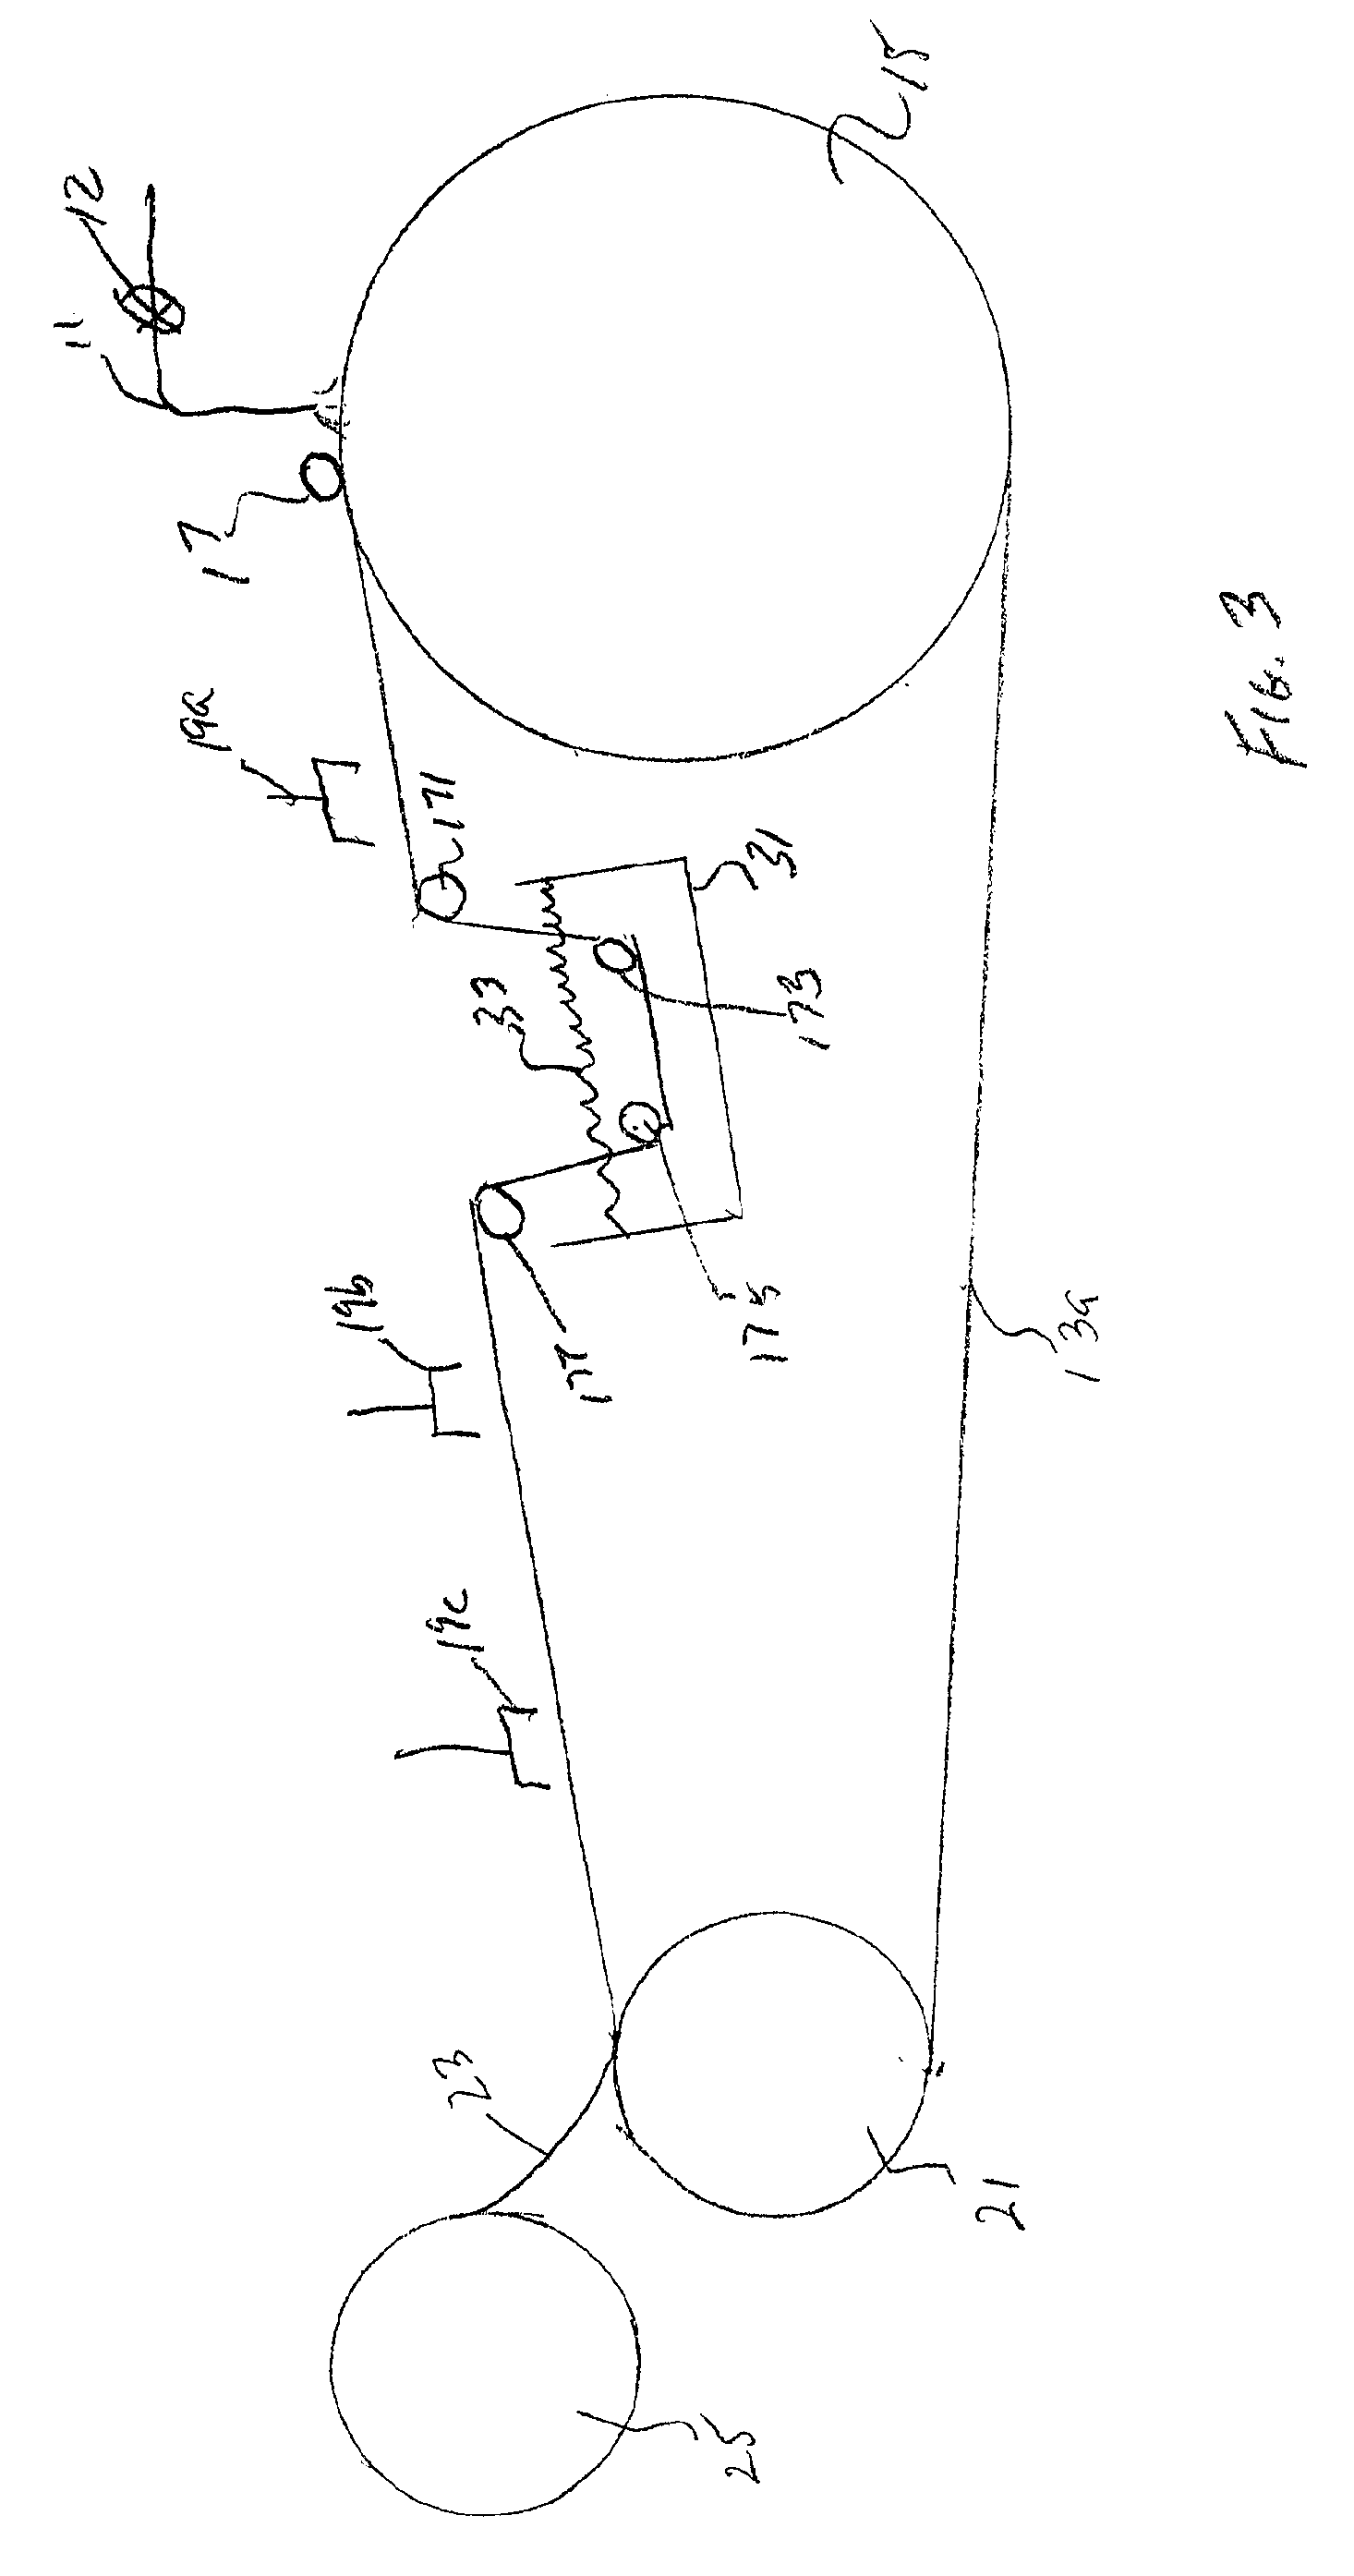 Method and apparatus for manufacturing latex free materials